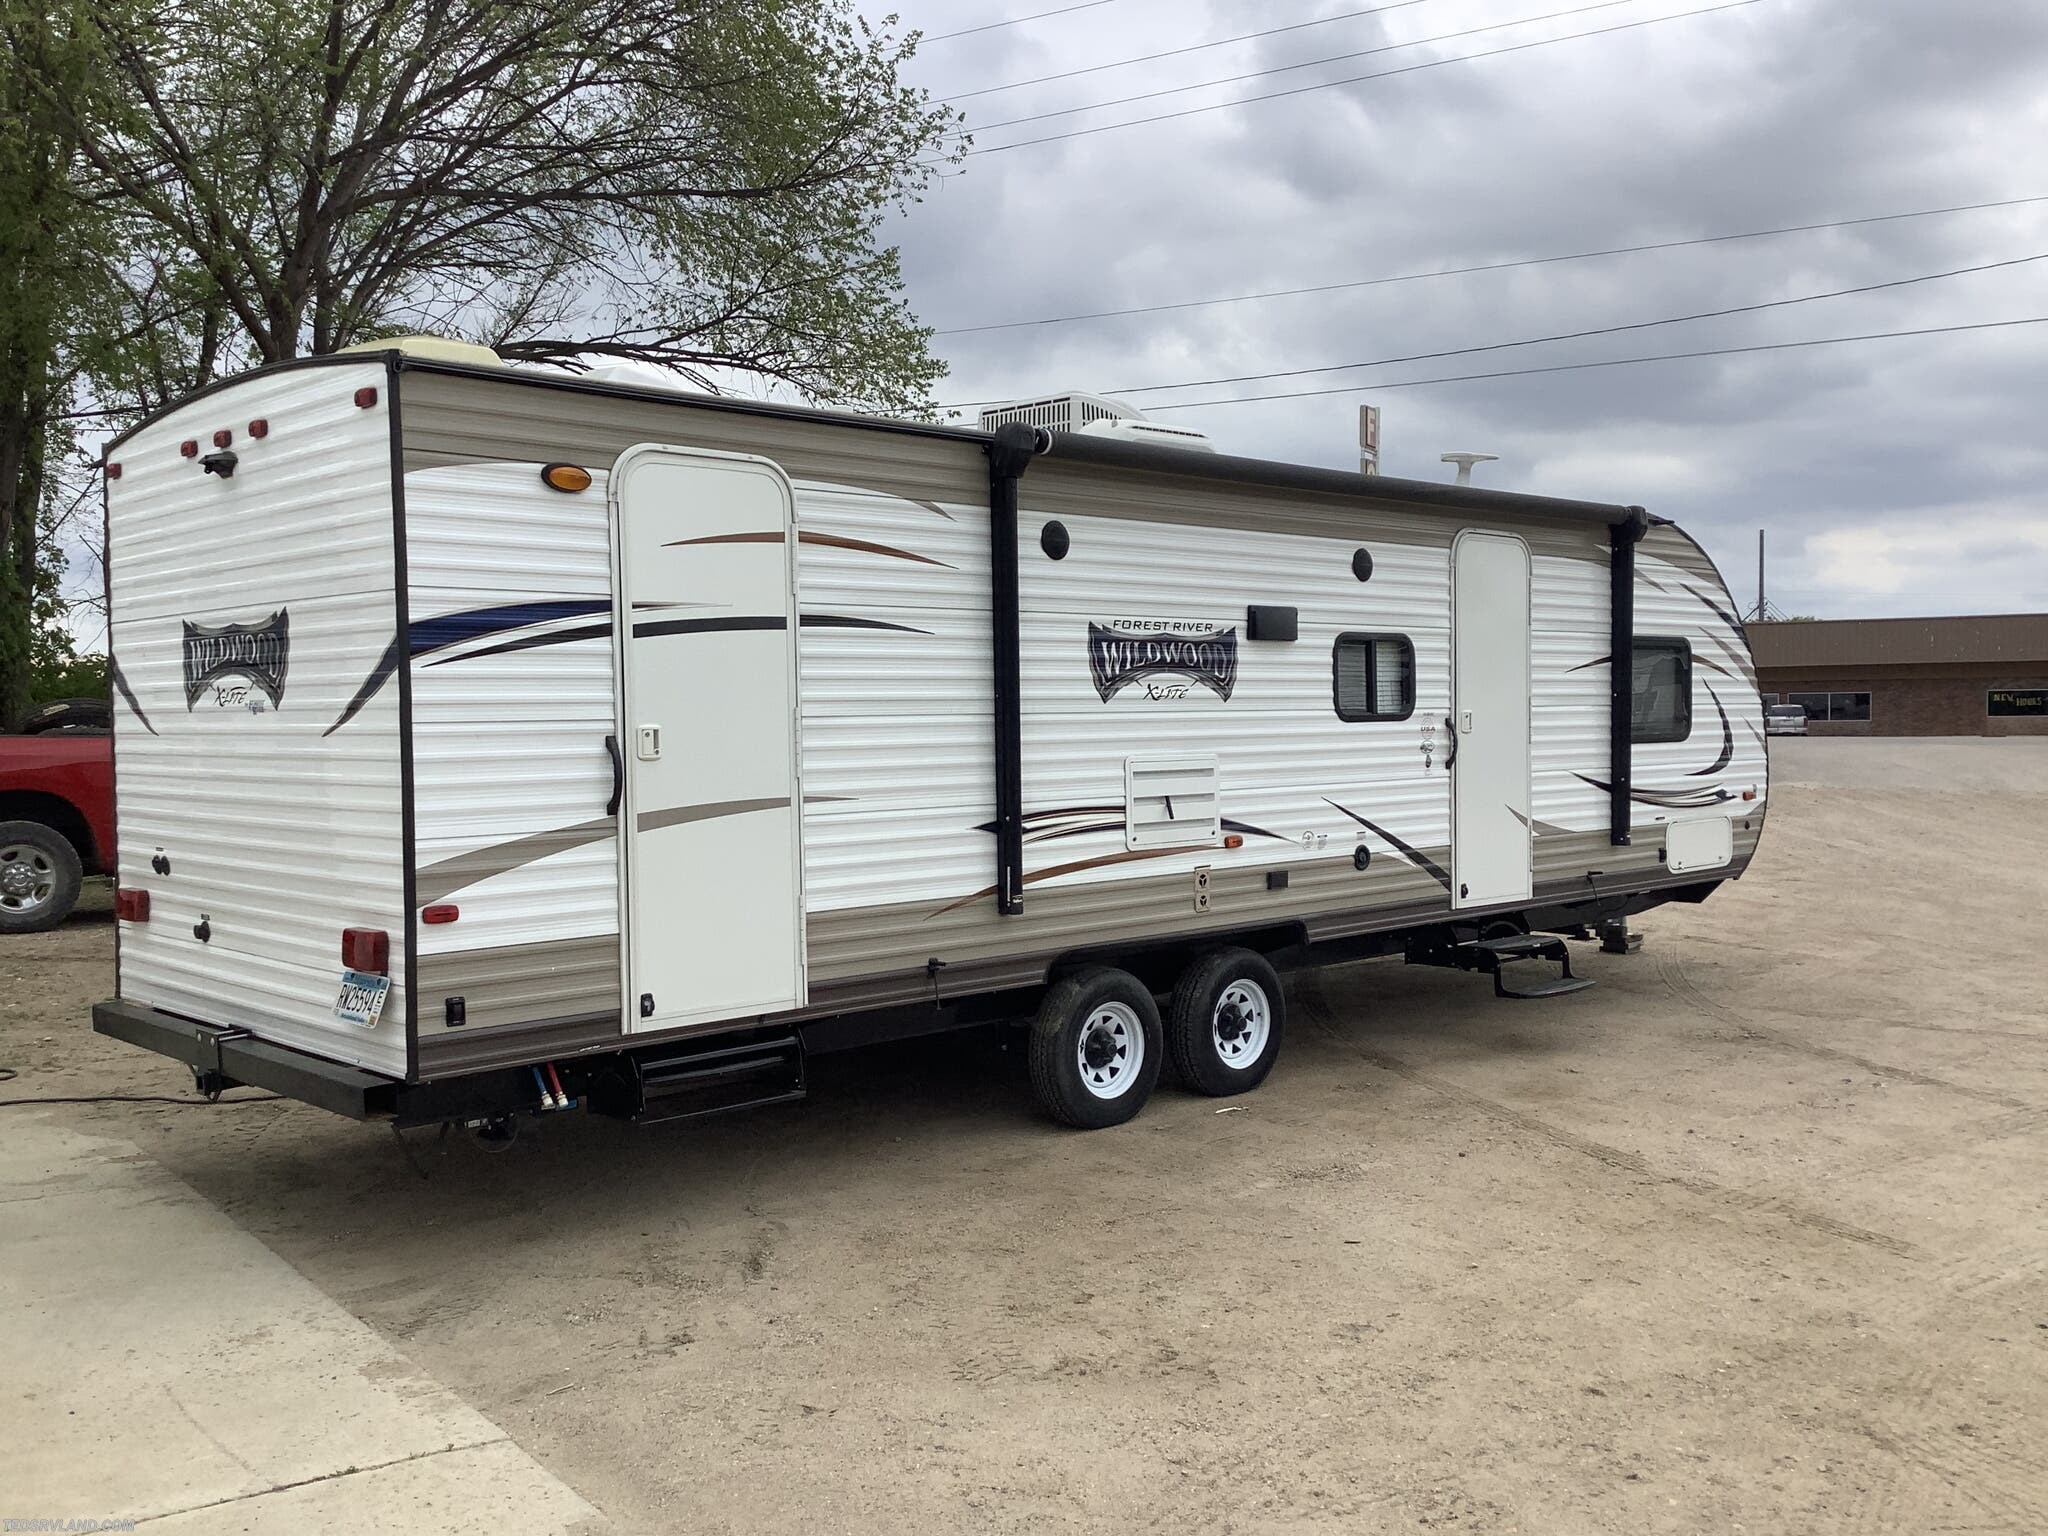 2018 Forest River Wildwood X-Lite 263BHXL RV for Sale in Paynesville, MN 56362 | J7358274 2018 Forest River Wildwood X Lite 263bhxl